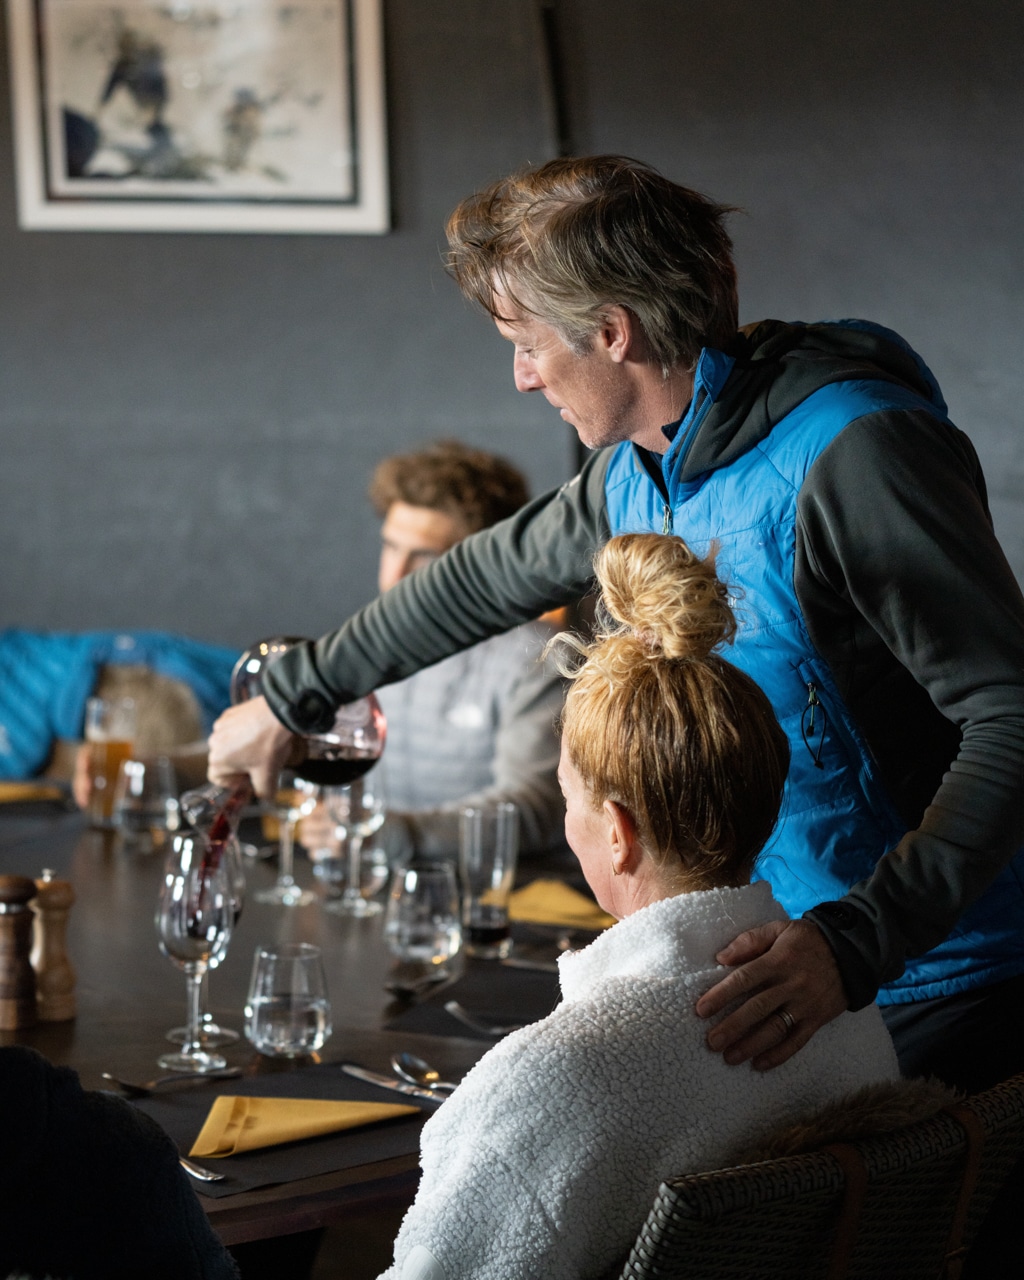 Patrick Woodhead pouring a glass of wine for a guest at Whichaway Camp in Antarctica.